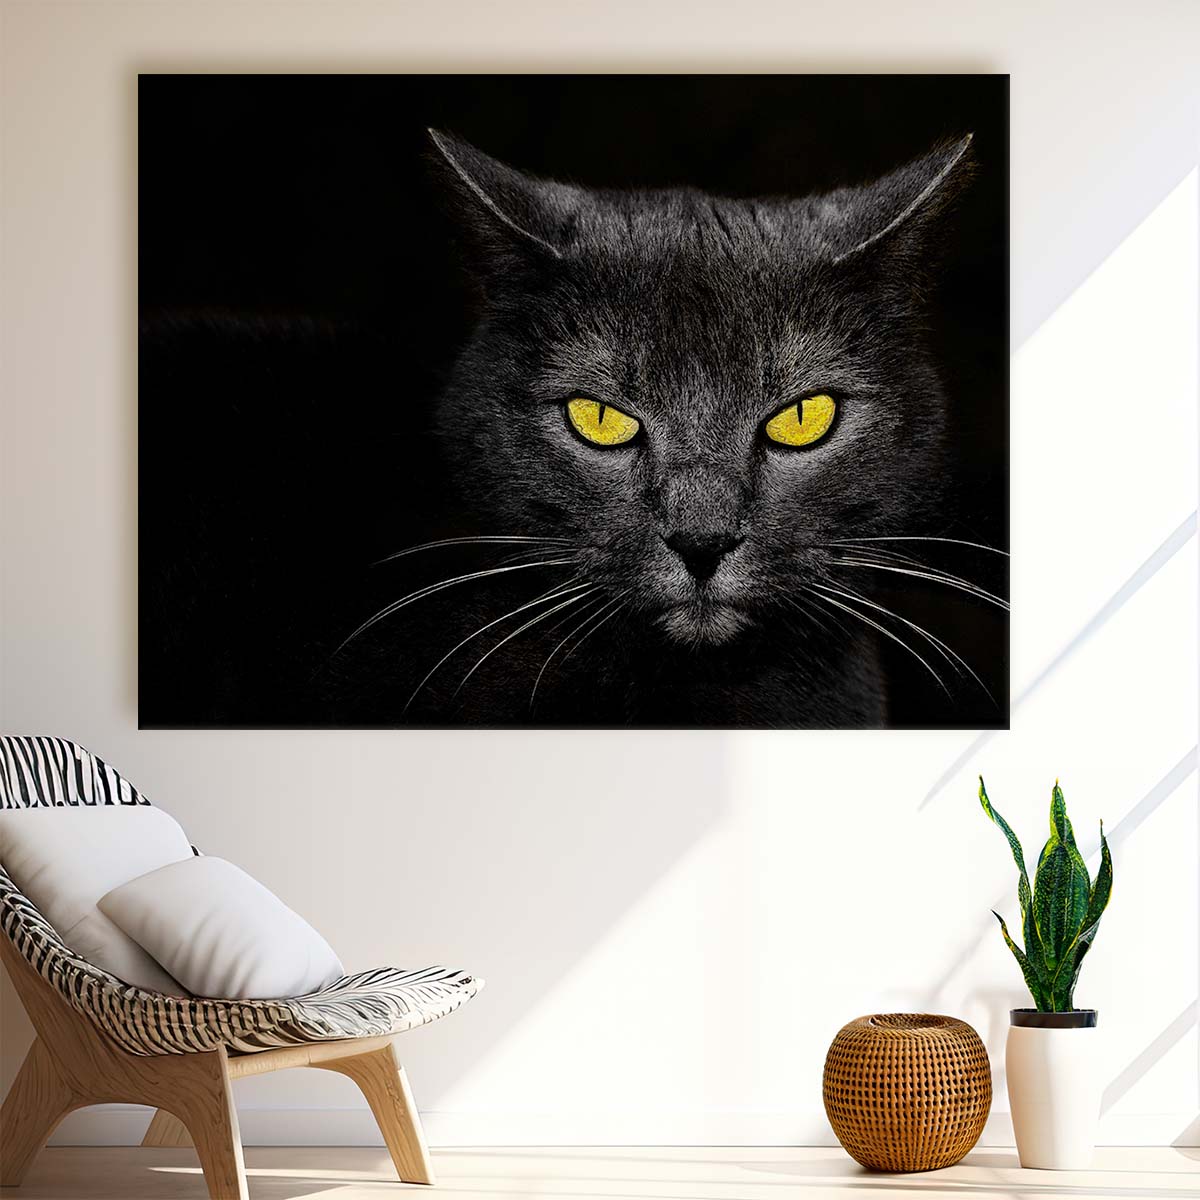 Black Cat with Yellow Eyes Dark Whiskers Wall Art by Luxuriance Designs. Made in USA.